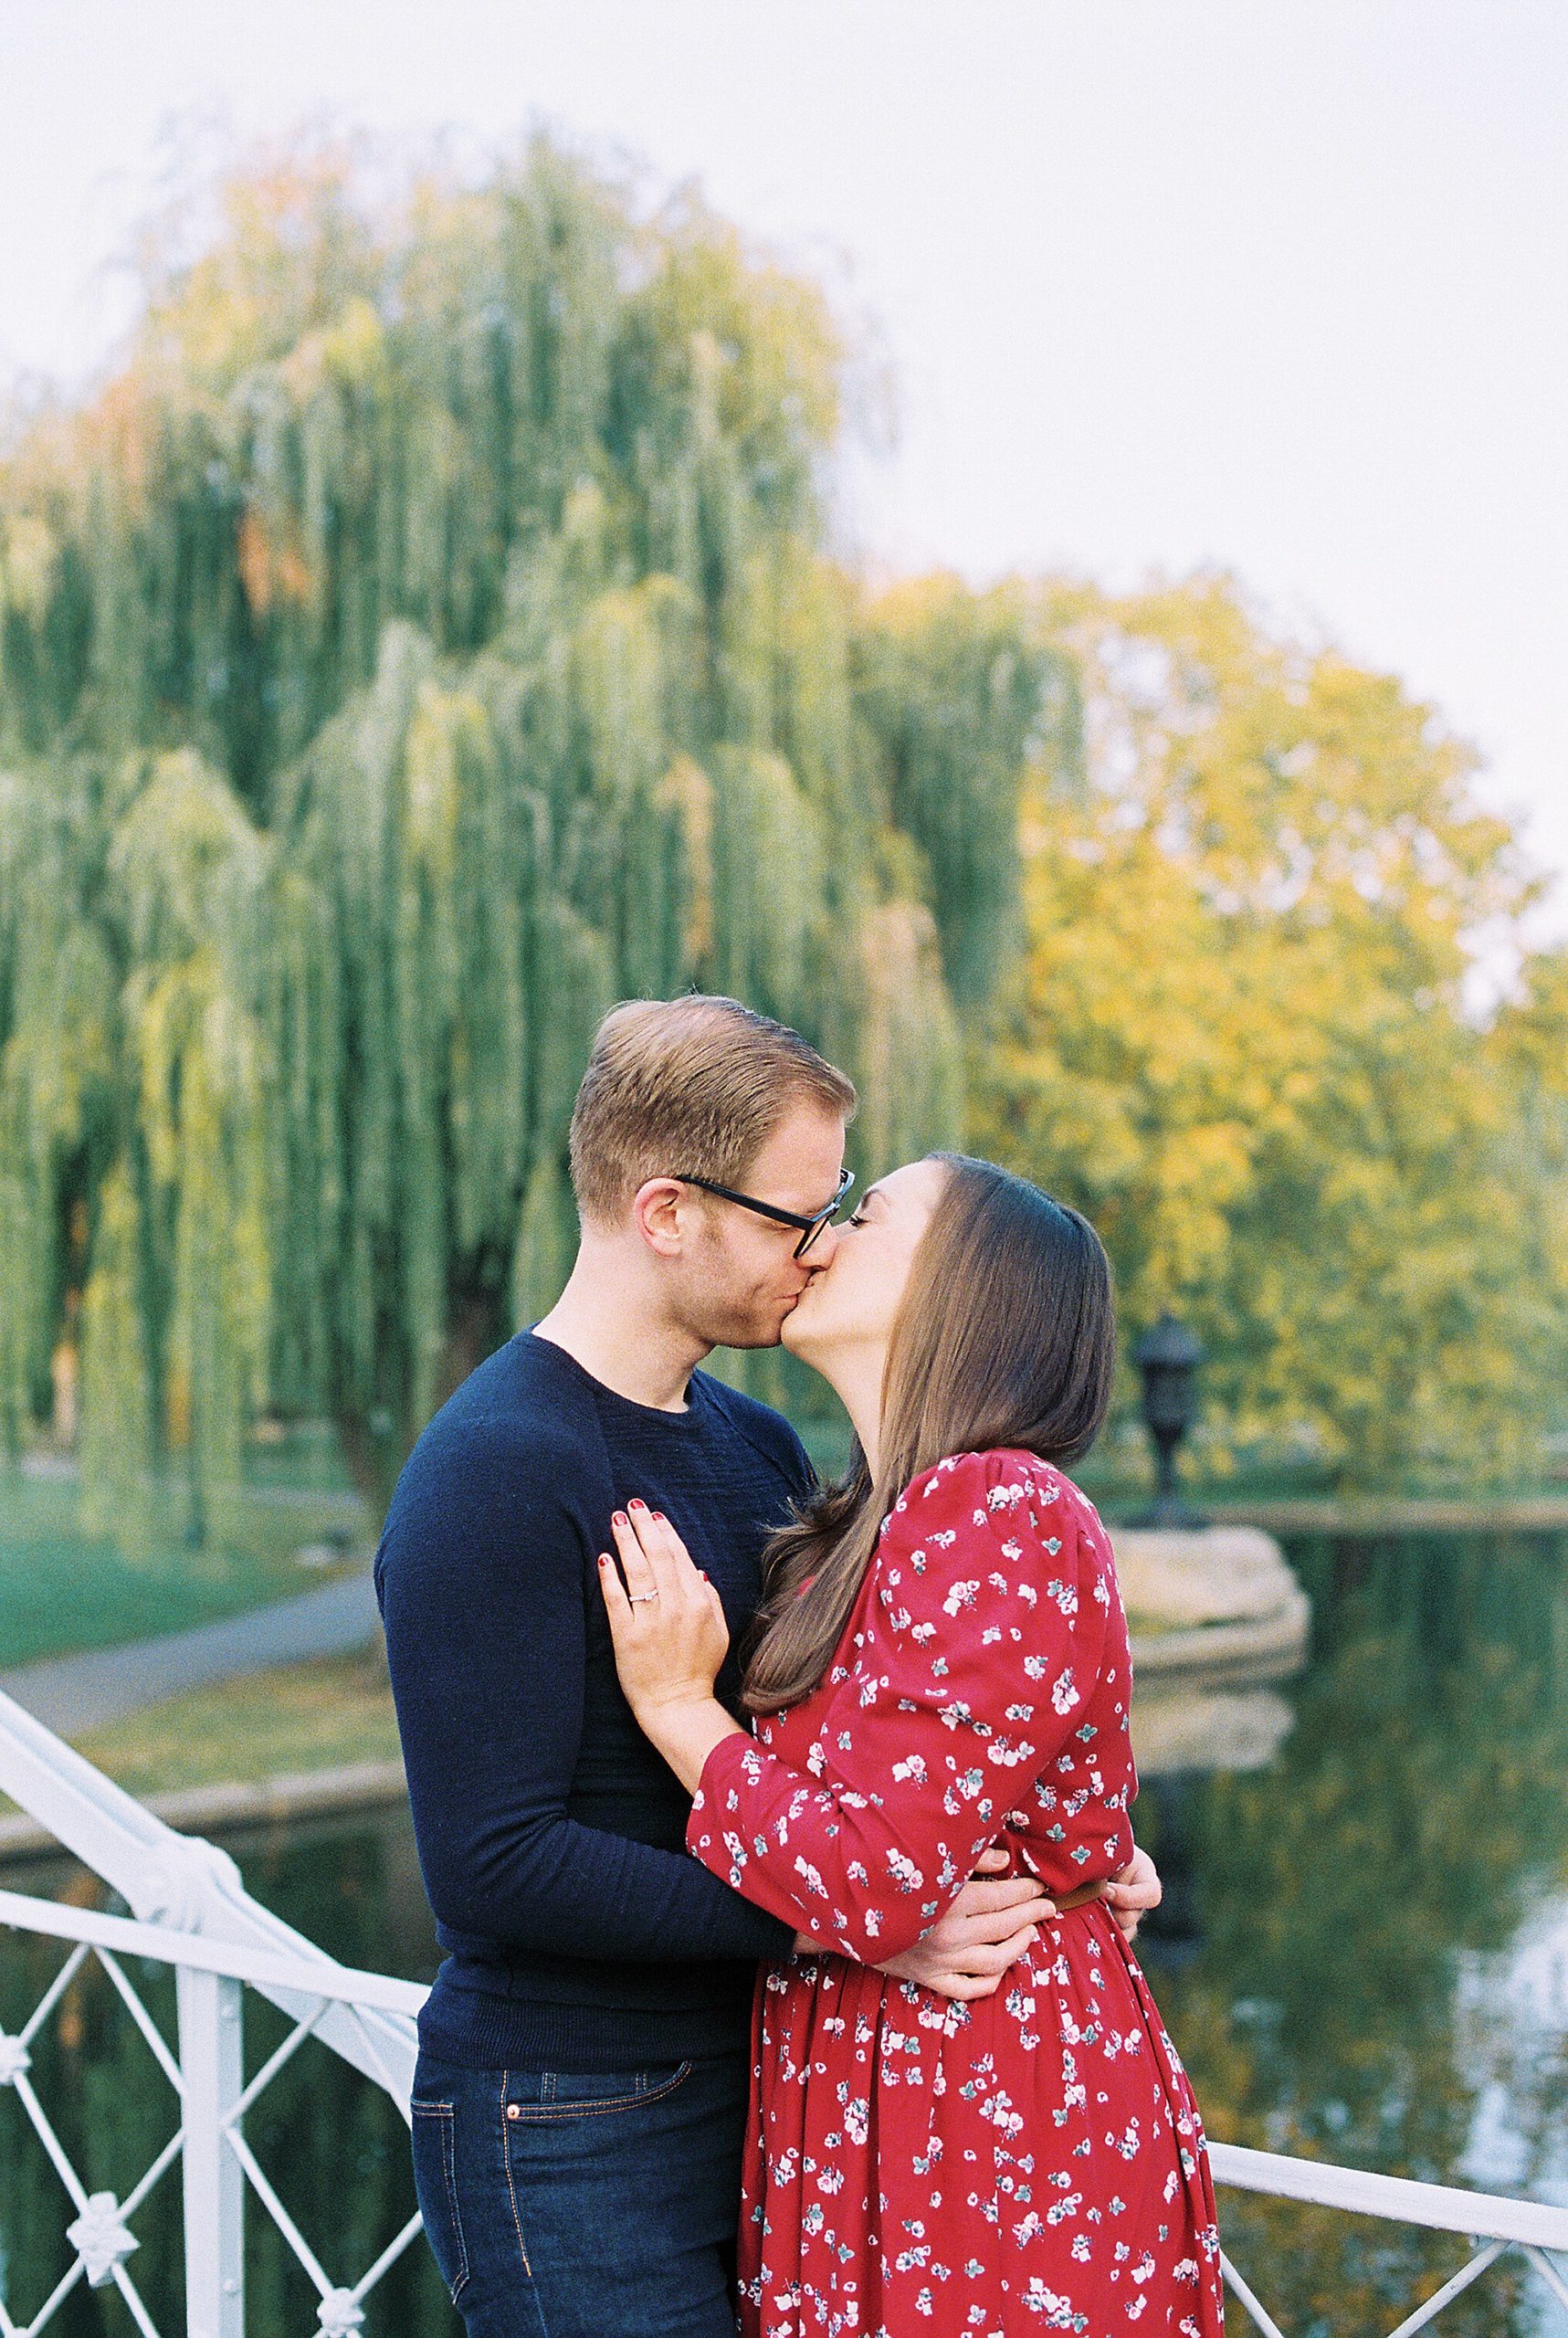 Boston Public Garden engagement session at sunrise Fall in New England